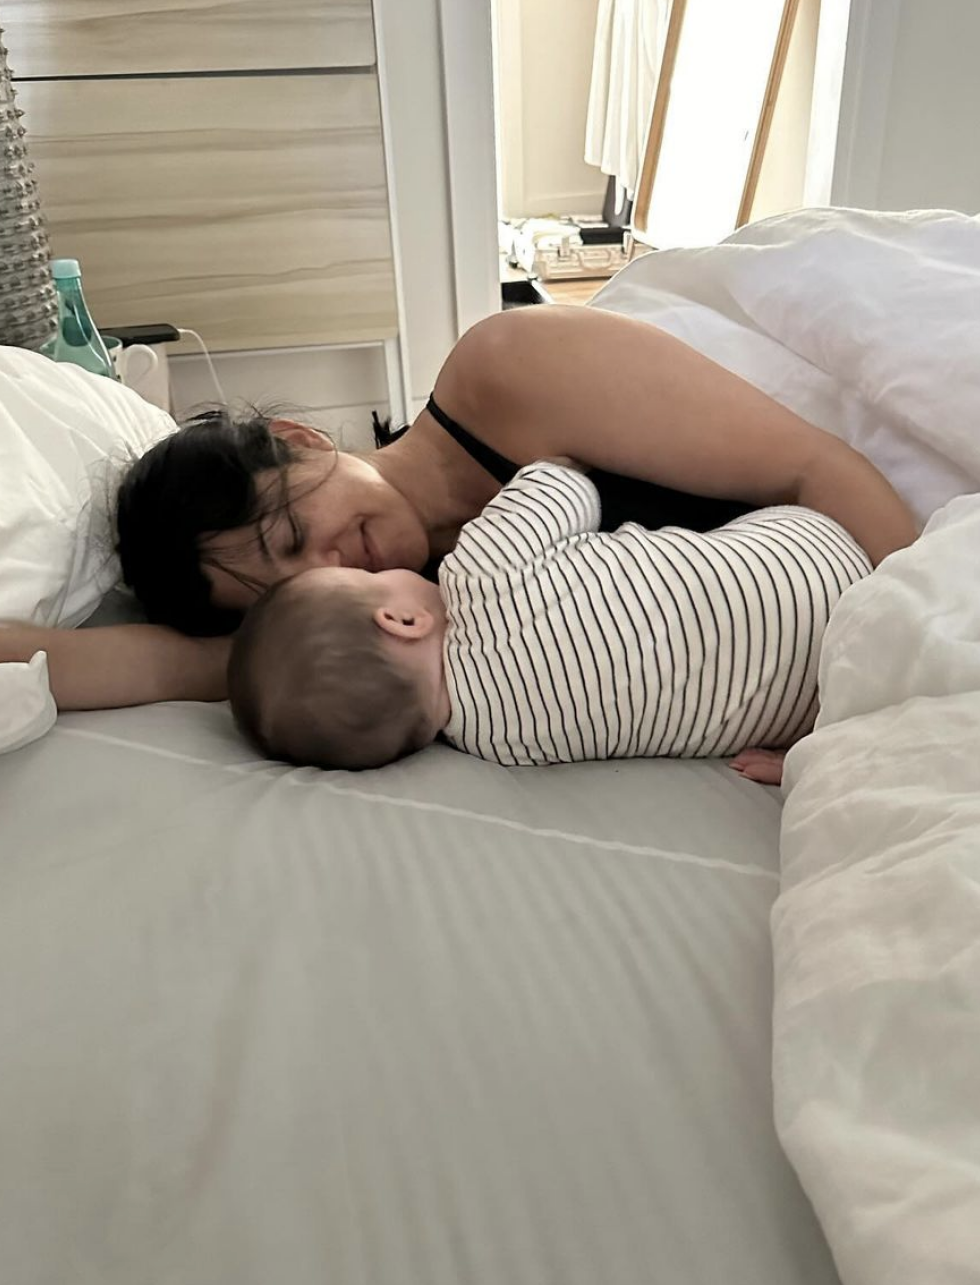 Kourtney Kardashian lies in bed facing her baby in striped clothing, nose to nose, while both rest on their sides under a comforter